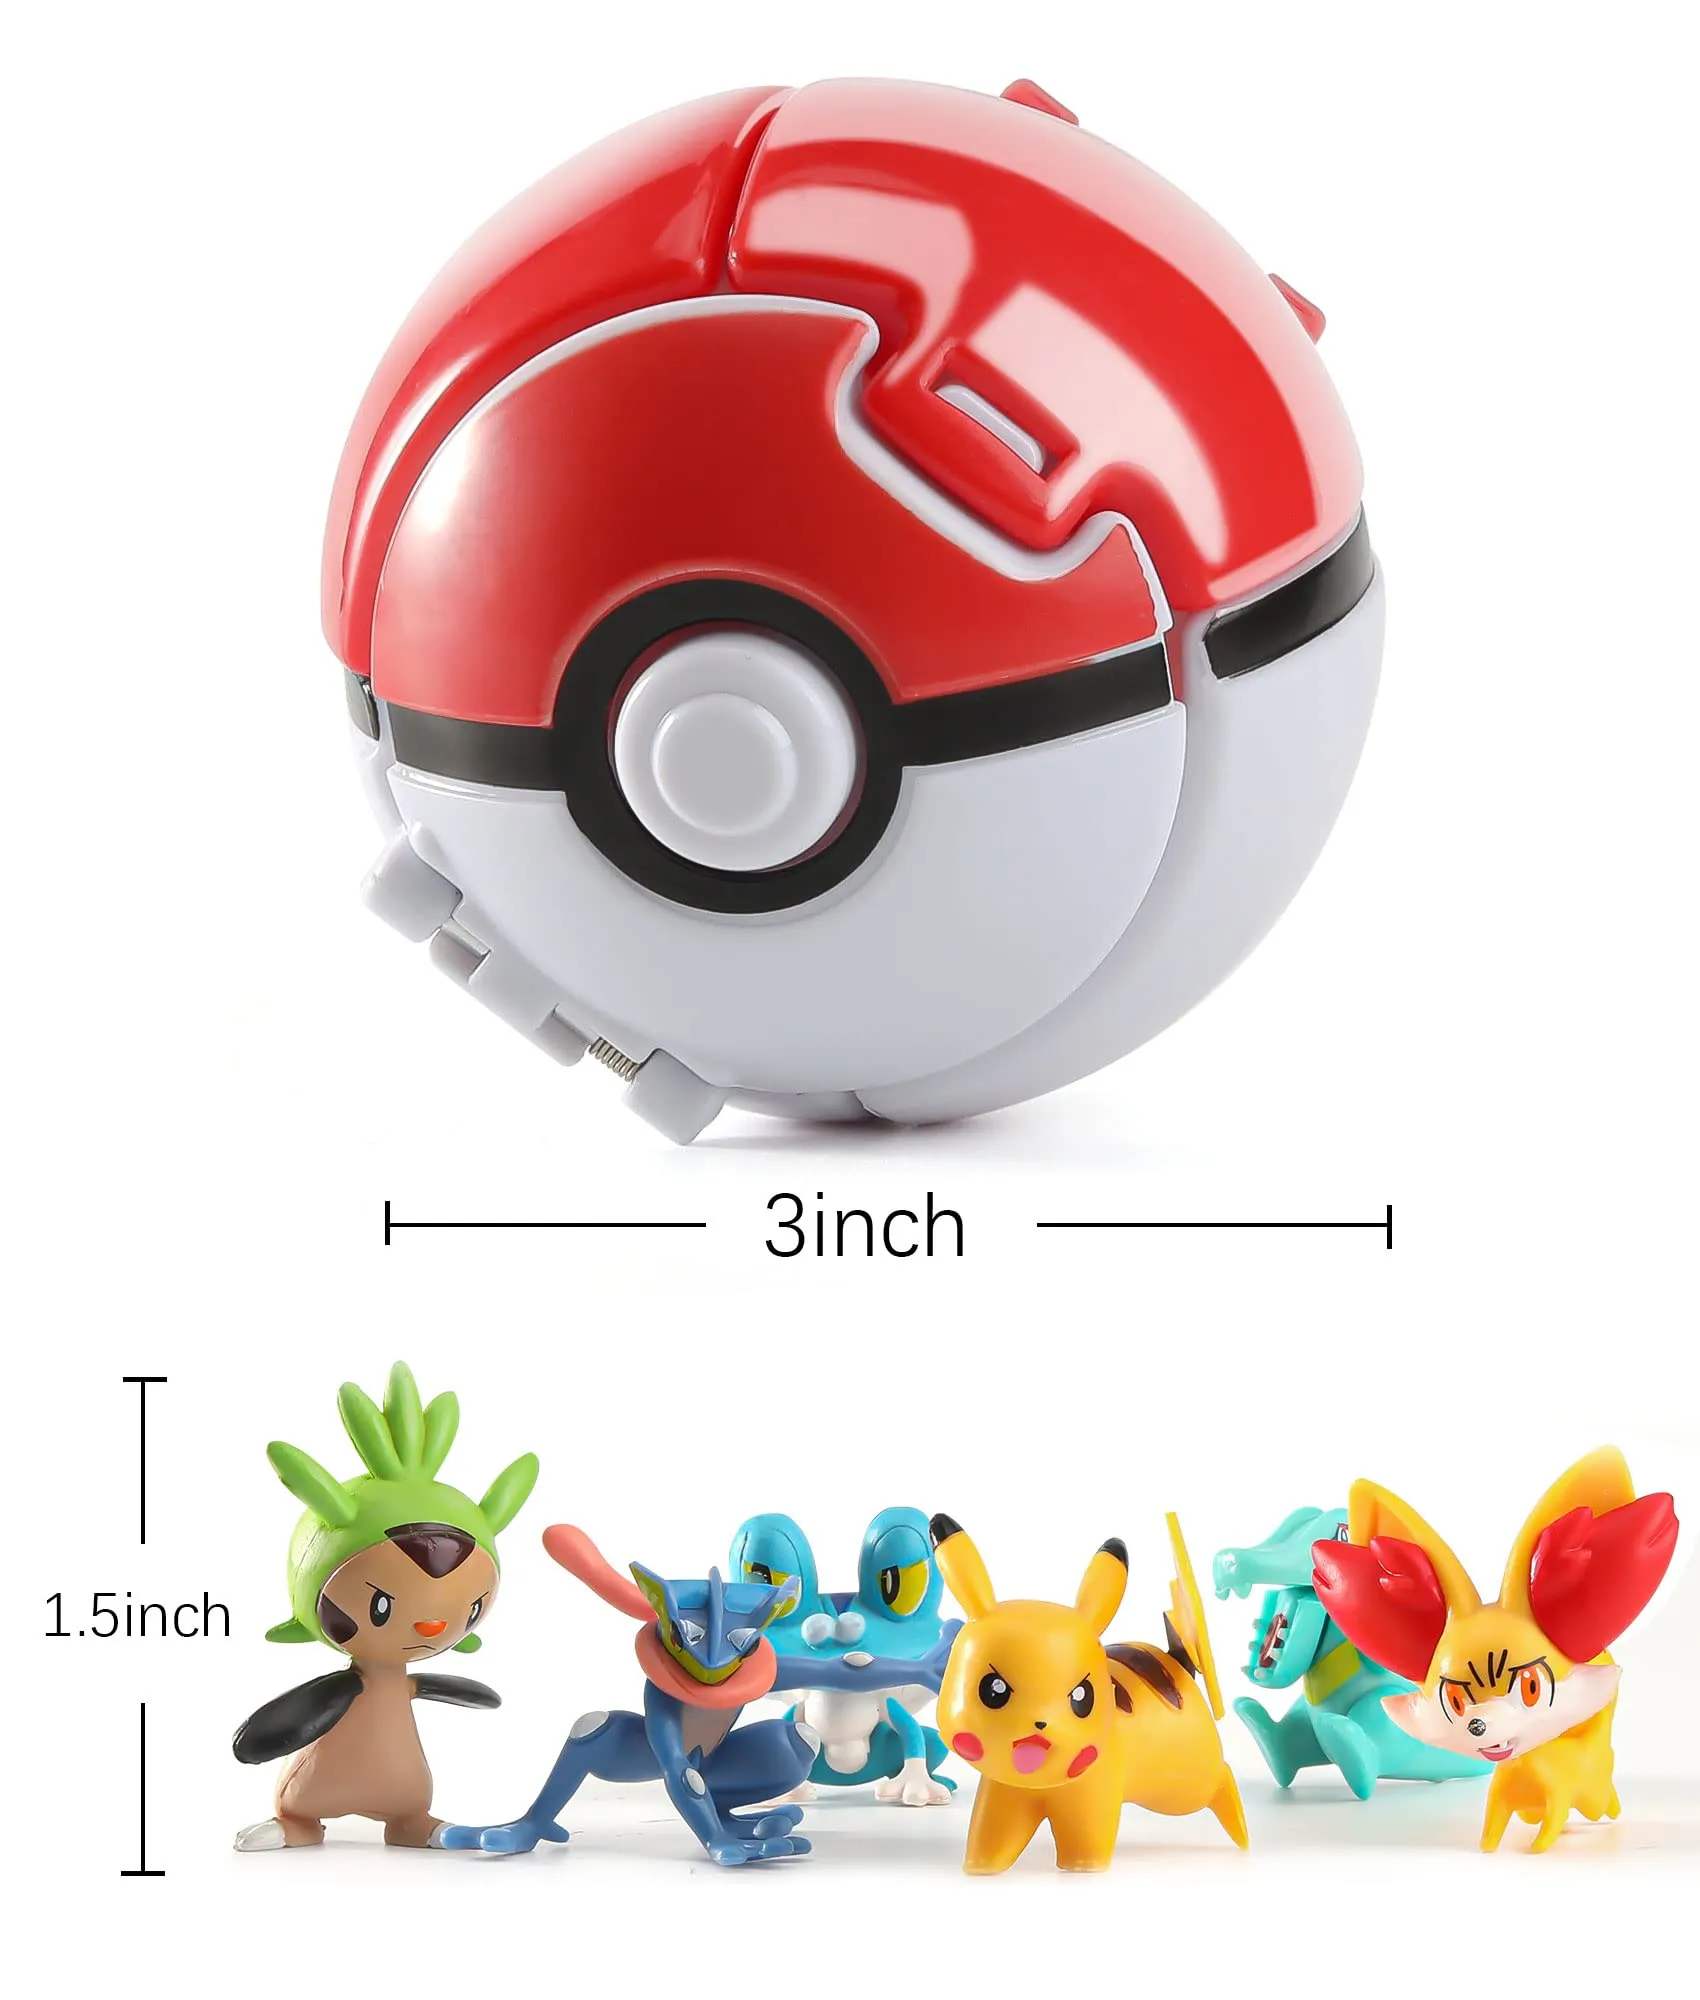 3ml pokeball clip and go balls with 4 battle figures 2 random action figures set toy gift for boys girls kids party favors